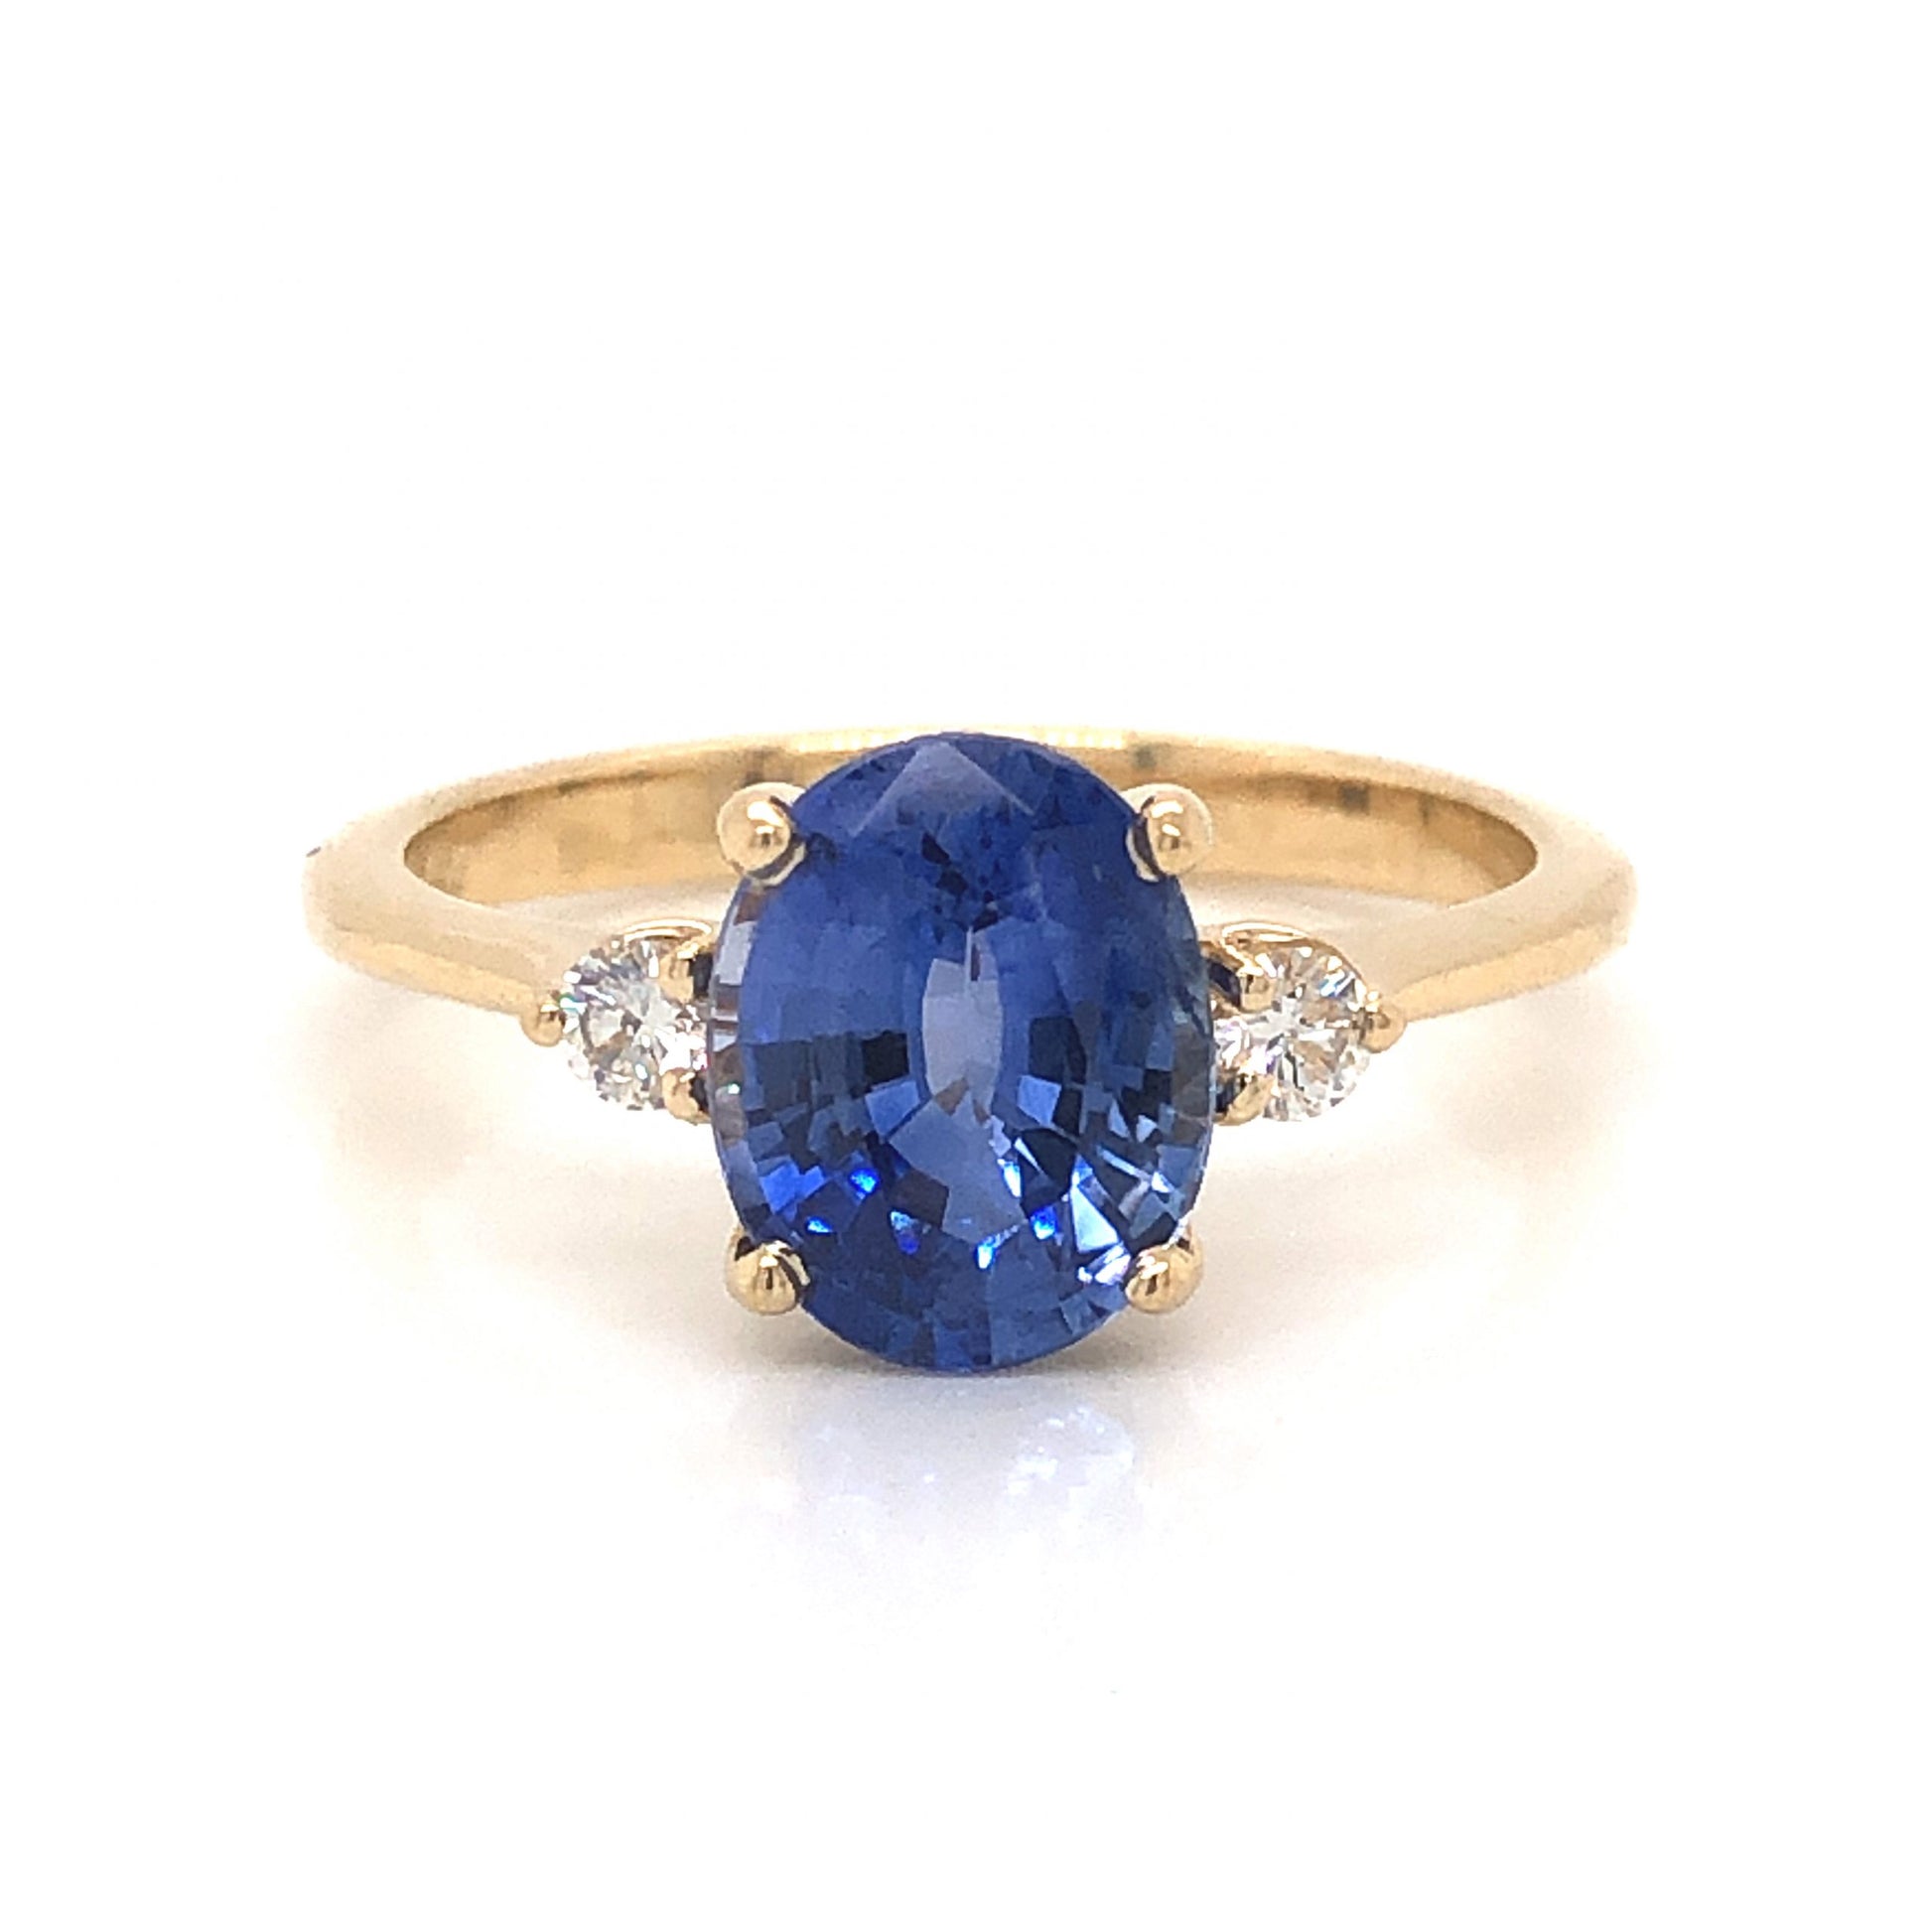 2.23 Oval Cut Sapphire Engagement Ring in Yellow GoldComposition: 14 Karat Yellow Gold Ring Size: 6.75 Total Diamond Weight: .12ct Total Gram Weight: 3.0 g Inscription: 14k
      